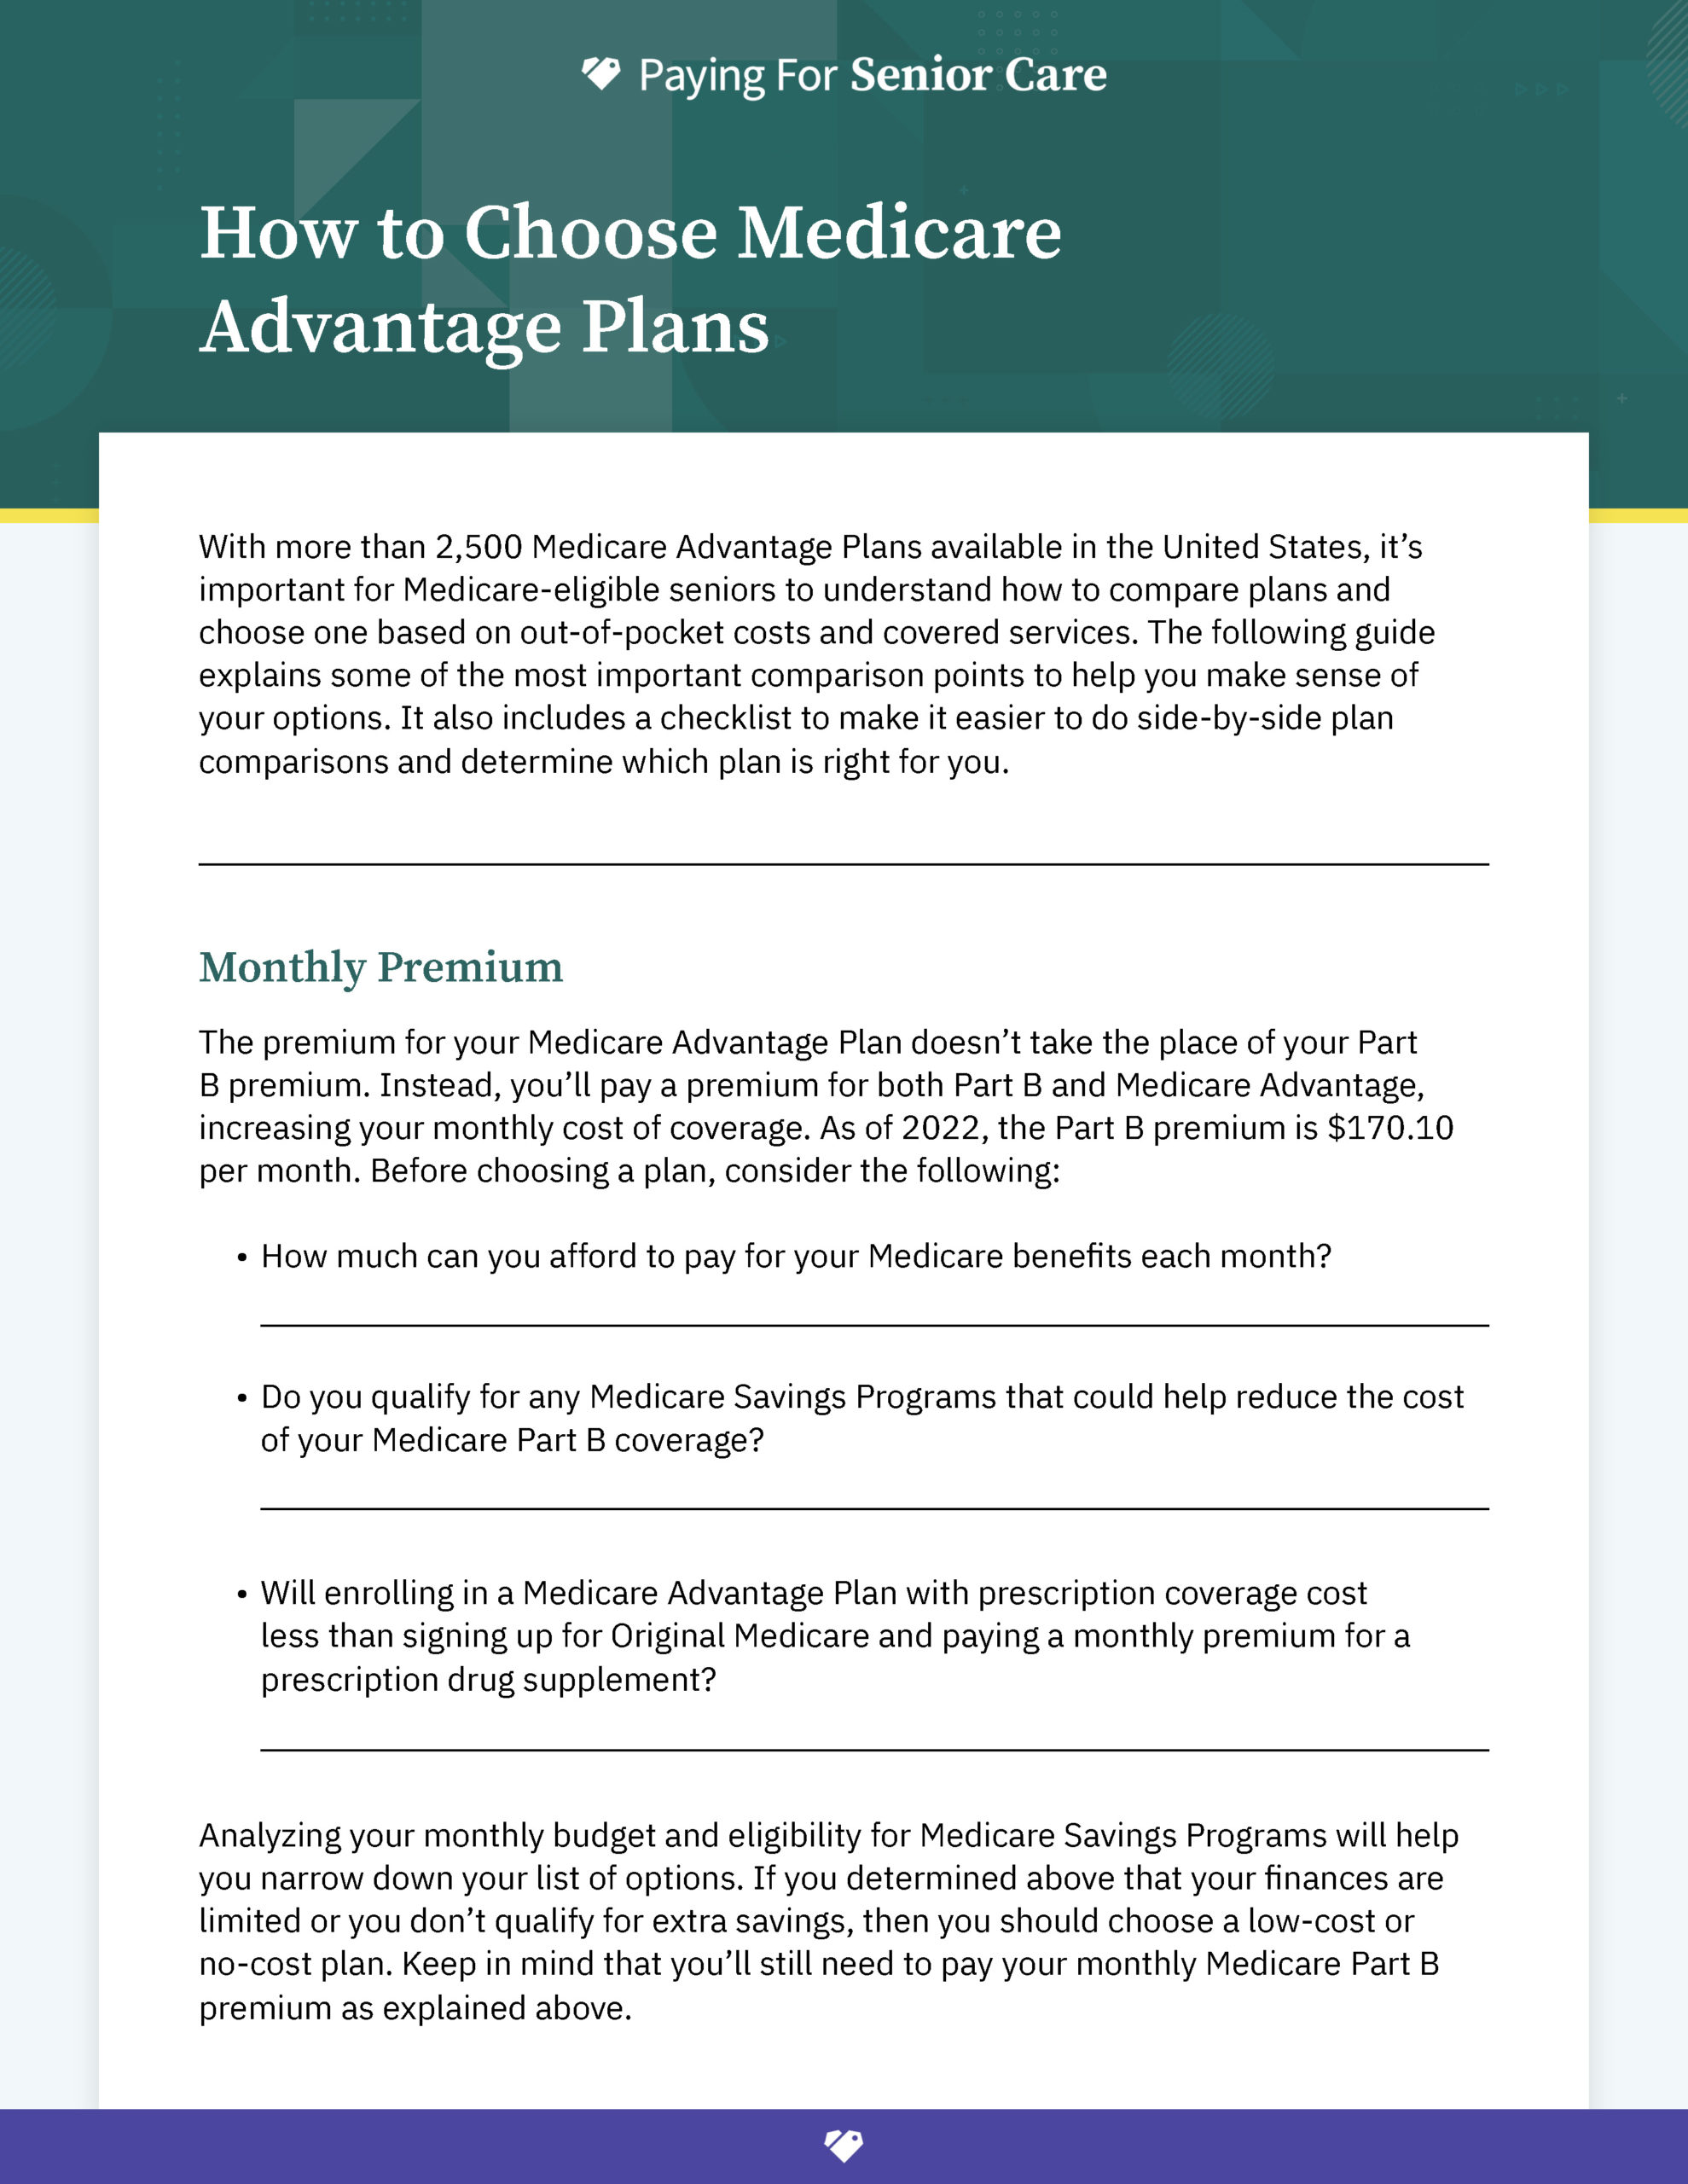 How Medicare Advantage Plans Work in California